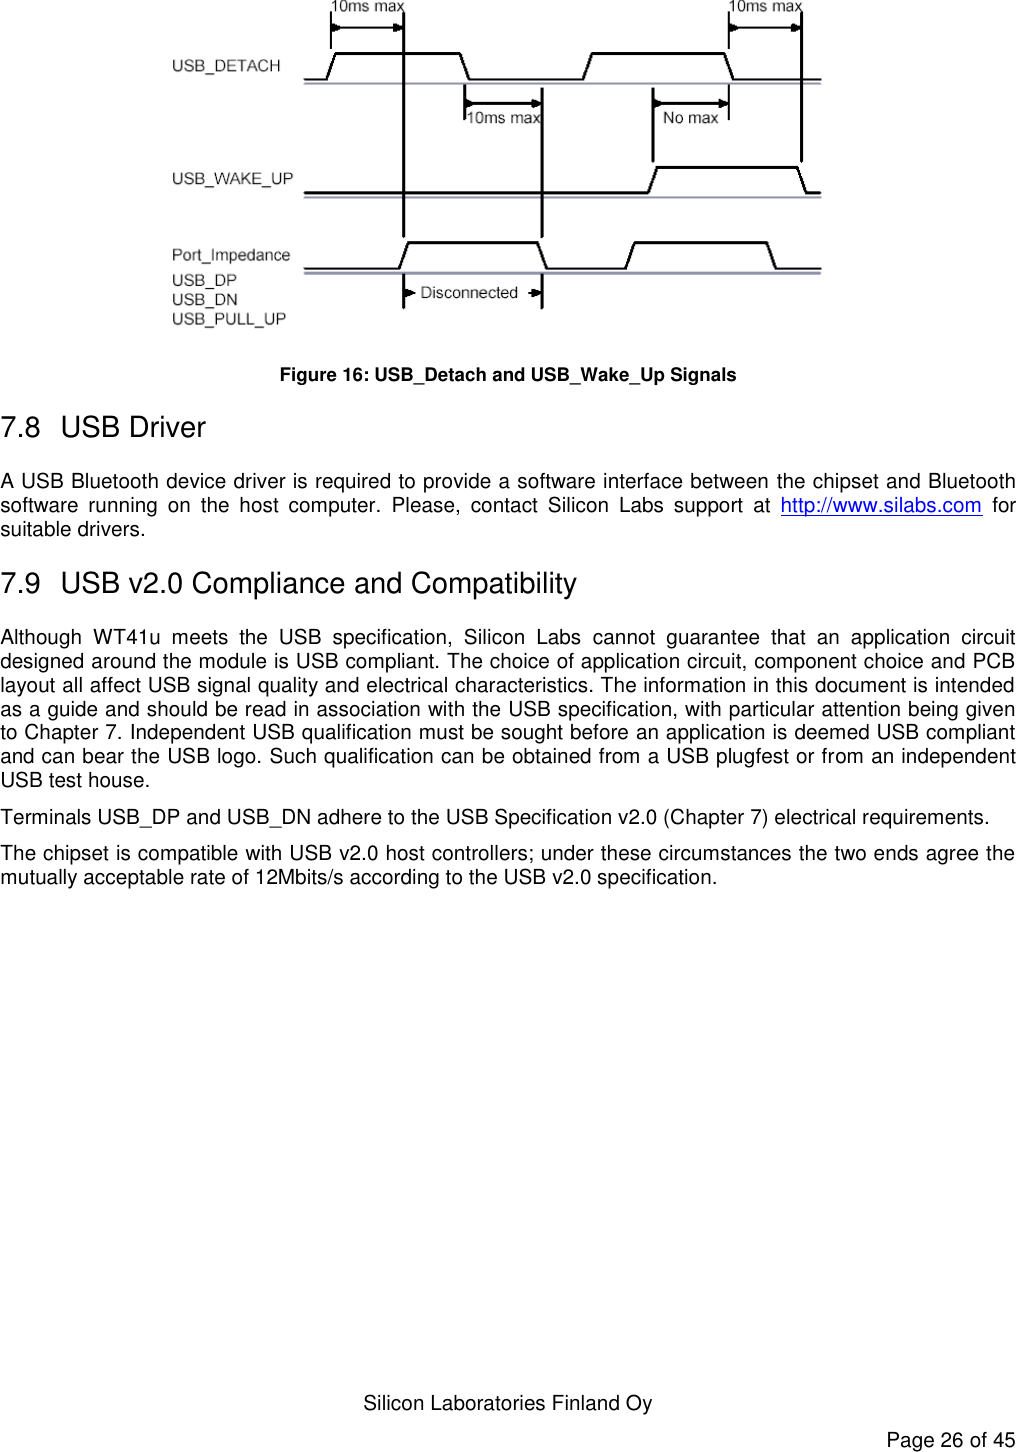   Silicon Laboratories Finland Oy Page 26 of 45  Figure 16: USB_Detach and USB_Wake_Up Signals 7.8  USB Driver A USB Bluetooth device driver is required to provide a software interface between the chipset and Bluetooth software  running  on  the  host  computer.  Please,  contact  Silicon  Labs  support  at  http://www.silabs.com  for suitable drivers. 7.9  USB v2.0 Compliance and Compatibility Although  WT41u  meets  the  USB  specification,  Silicon  Labs  cannot  guarantee  that  an  application  circuit designed around the module is USB compliant. The choice of application circuit, component choice and PCB layout all affect USB signal quality and electrical characteristics. The information in this document is intended as a guide and should be read in association with the USB specification, with particular attention being given to Chapter 7. Independent USB qualification must be sought before an application is deemed USB compliant and can bear the USB logo. Such qualification can be obtained from a USB plugfest or from an independent USB test house. Terminals USB_DP and USB_DN adhere to the USB Specification v2.0 (Chapter 7) electrical requirements. The chipset is compatible with USB v2.0 host controllers; under these circumstances the two ends agree the mutually acceptable rate of 12Mbits/s according to the USB v2.0 specification.  